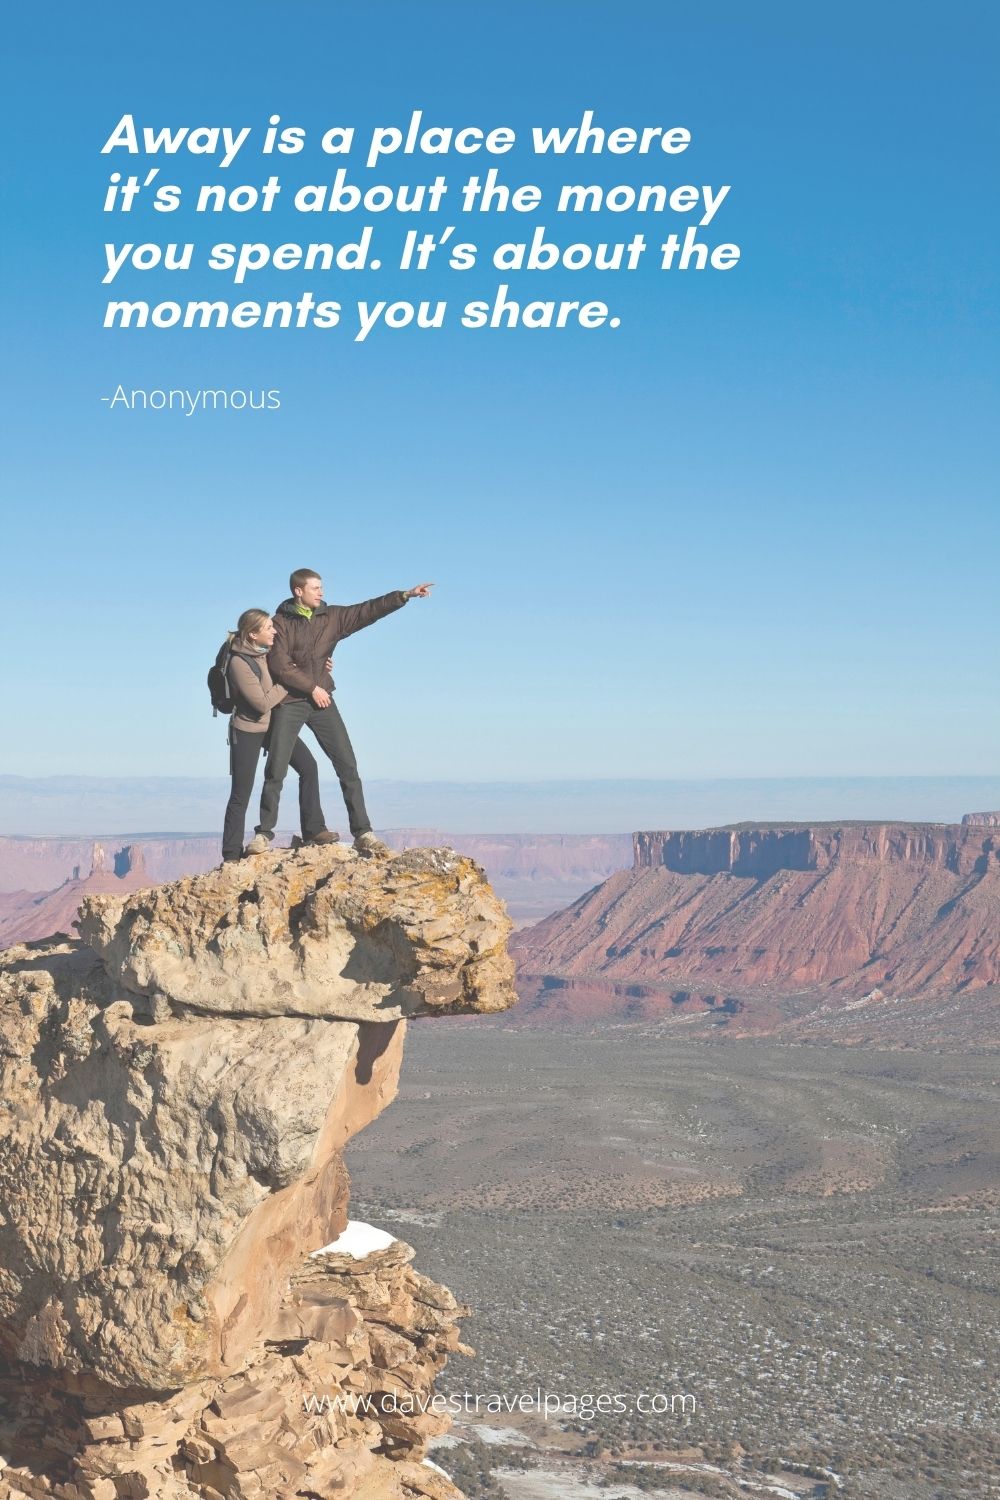 Sharing adventure memories quote: Away is a place where it’s not about the money you spend. It’s about the moments you share.